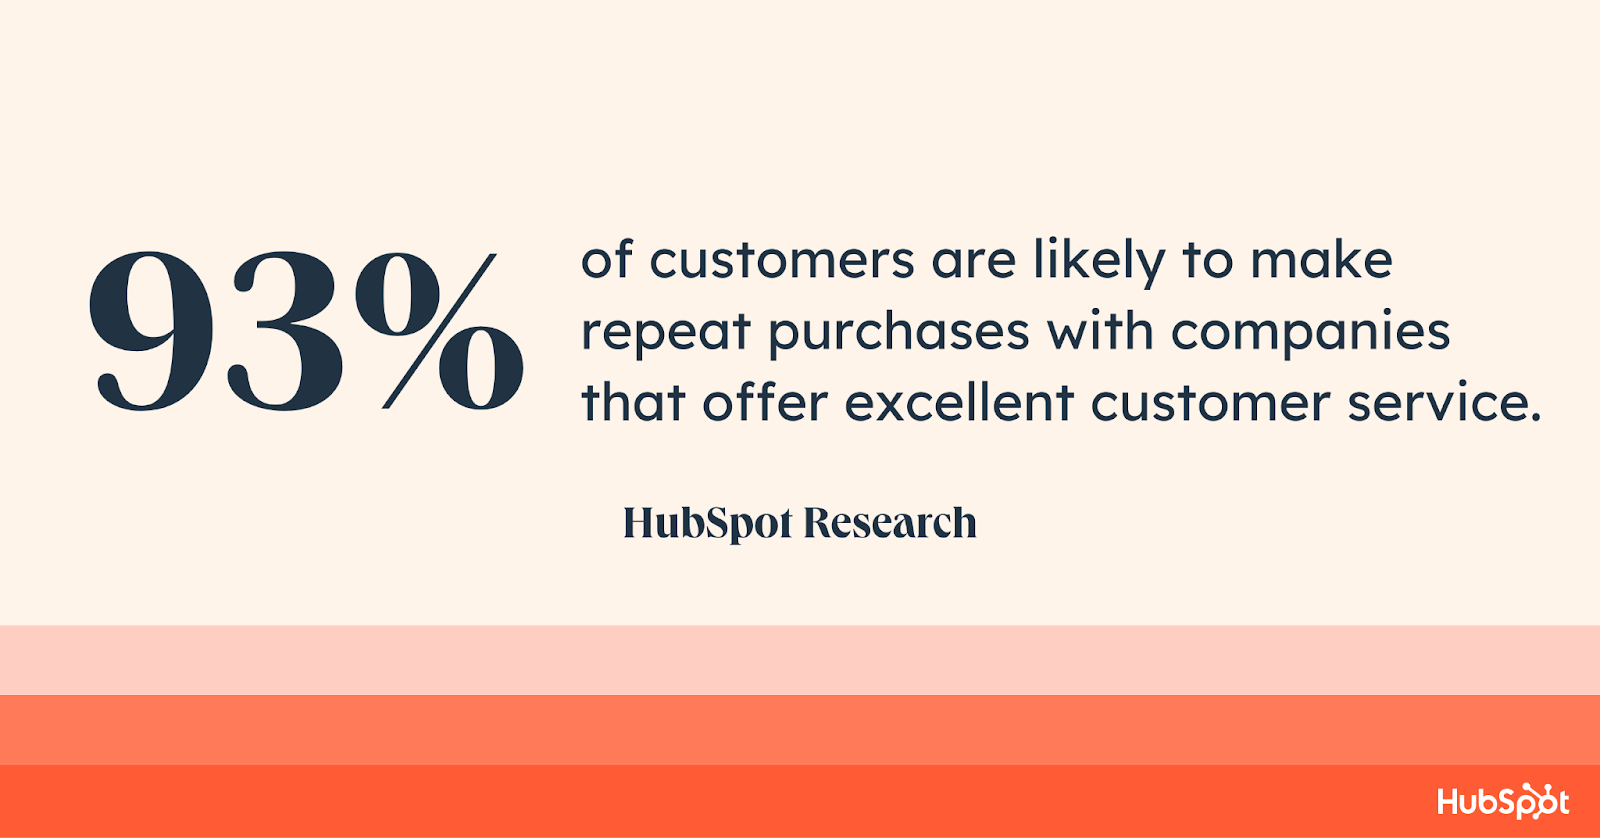 93% of customers are likely to make repeat purchases with companies that offer excellent customer service